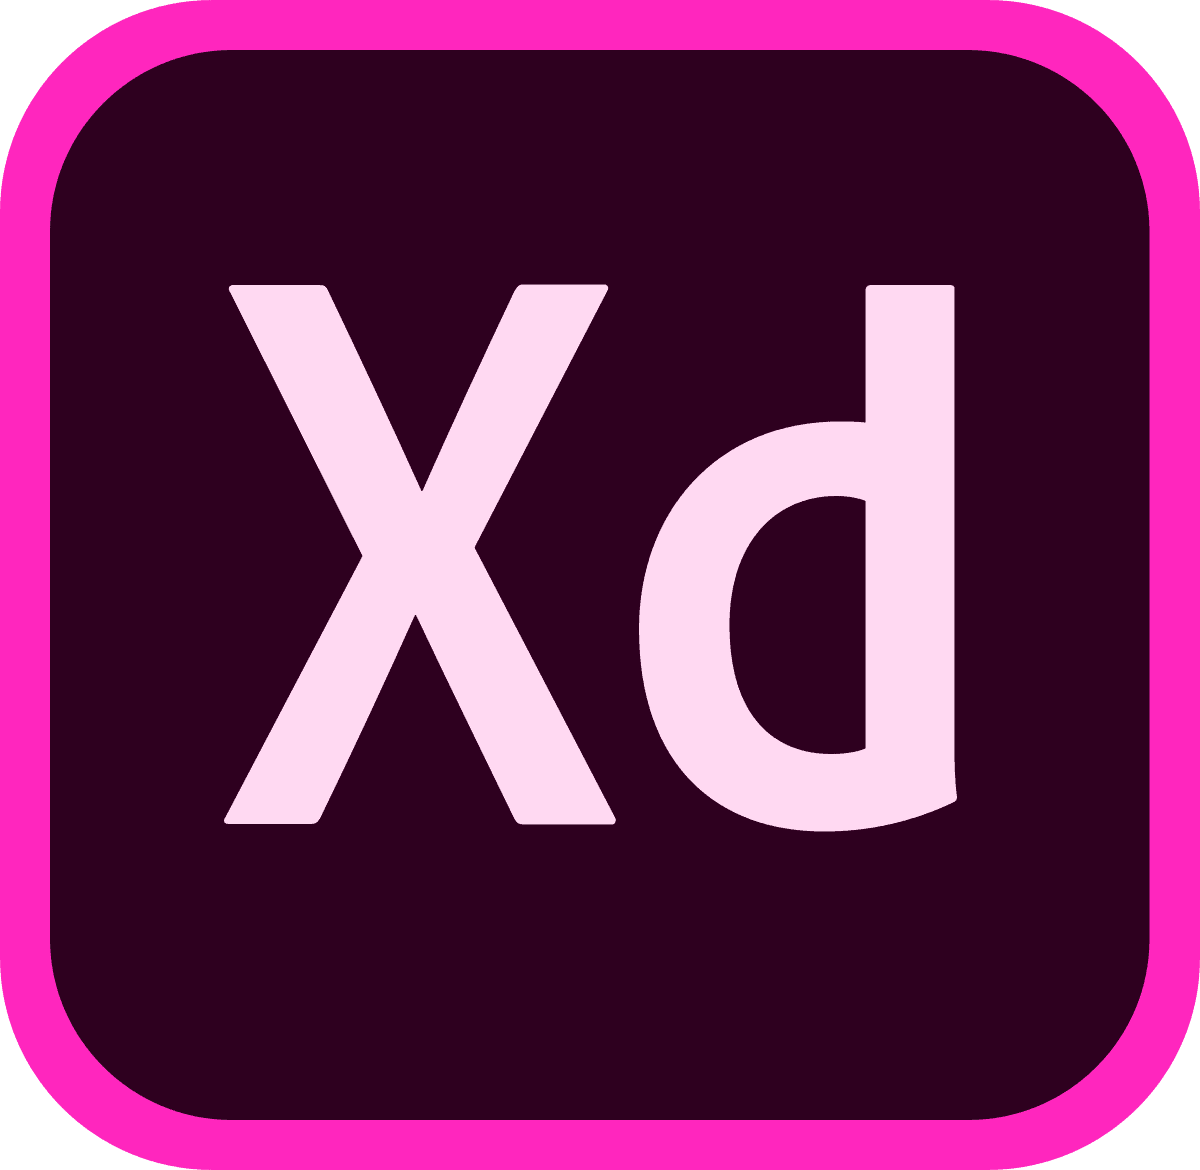 download adobe xd free for windows 10